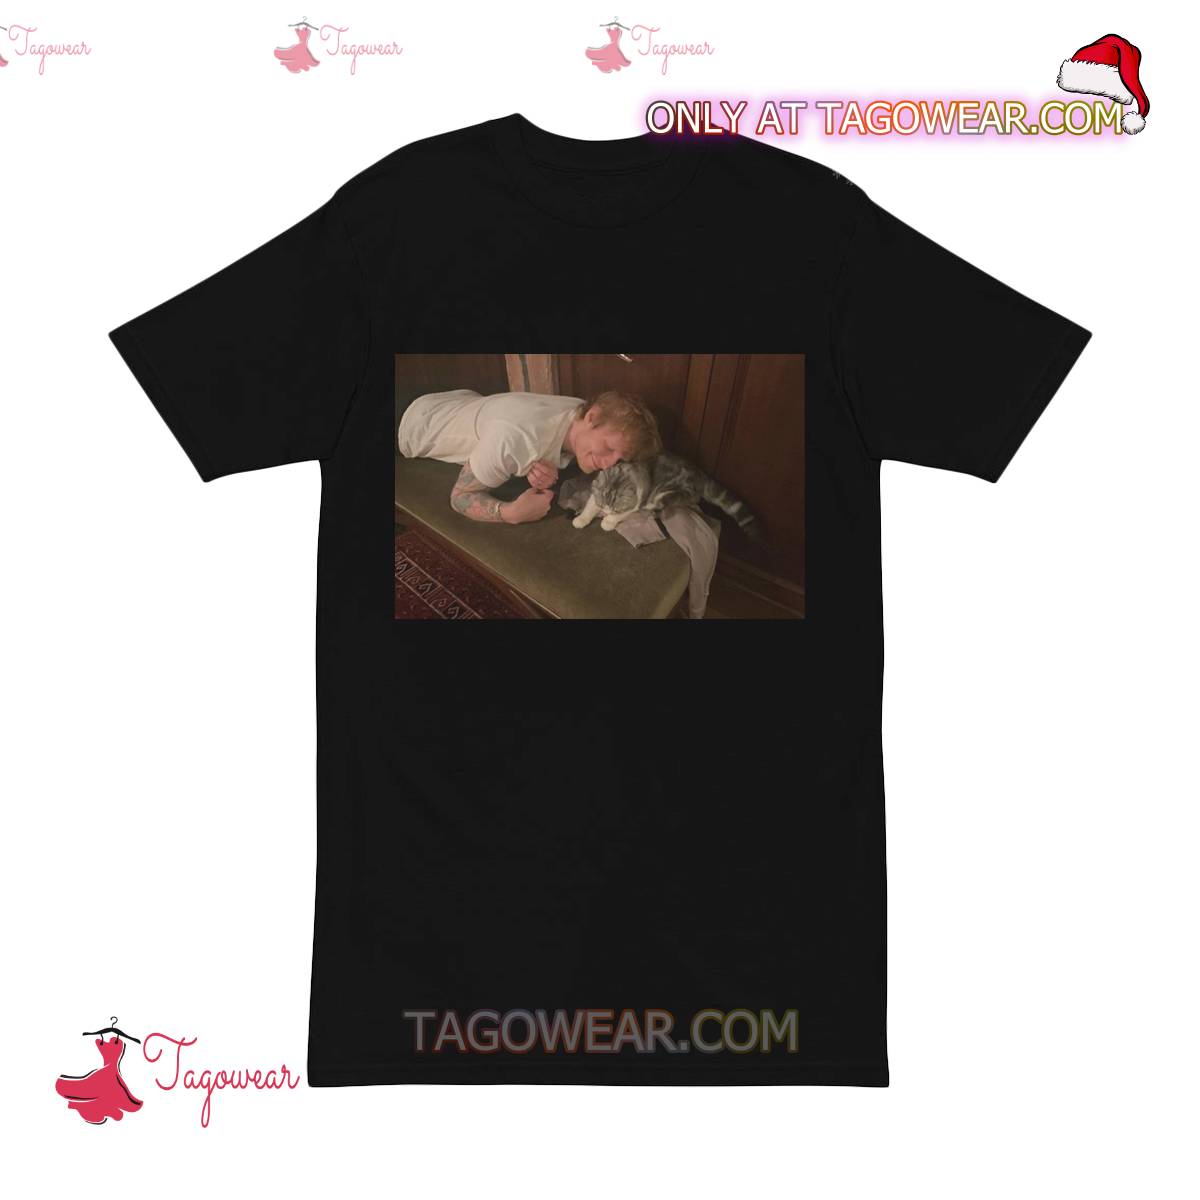 Taylor Swift's Cat Meredith With Ed Sheeran In New Photo Shirt a